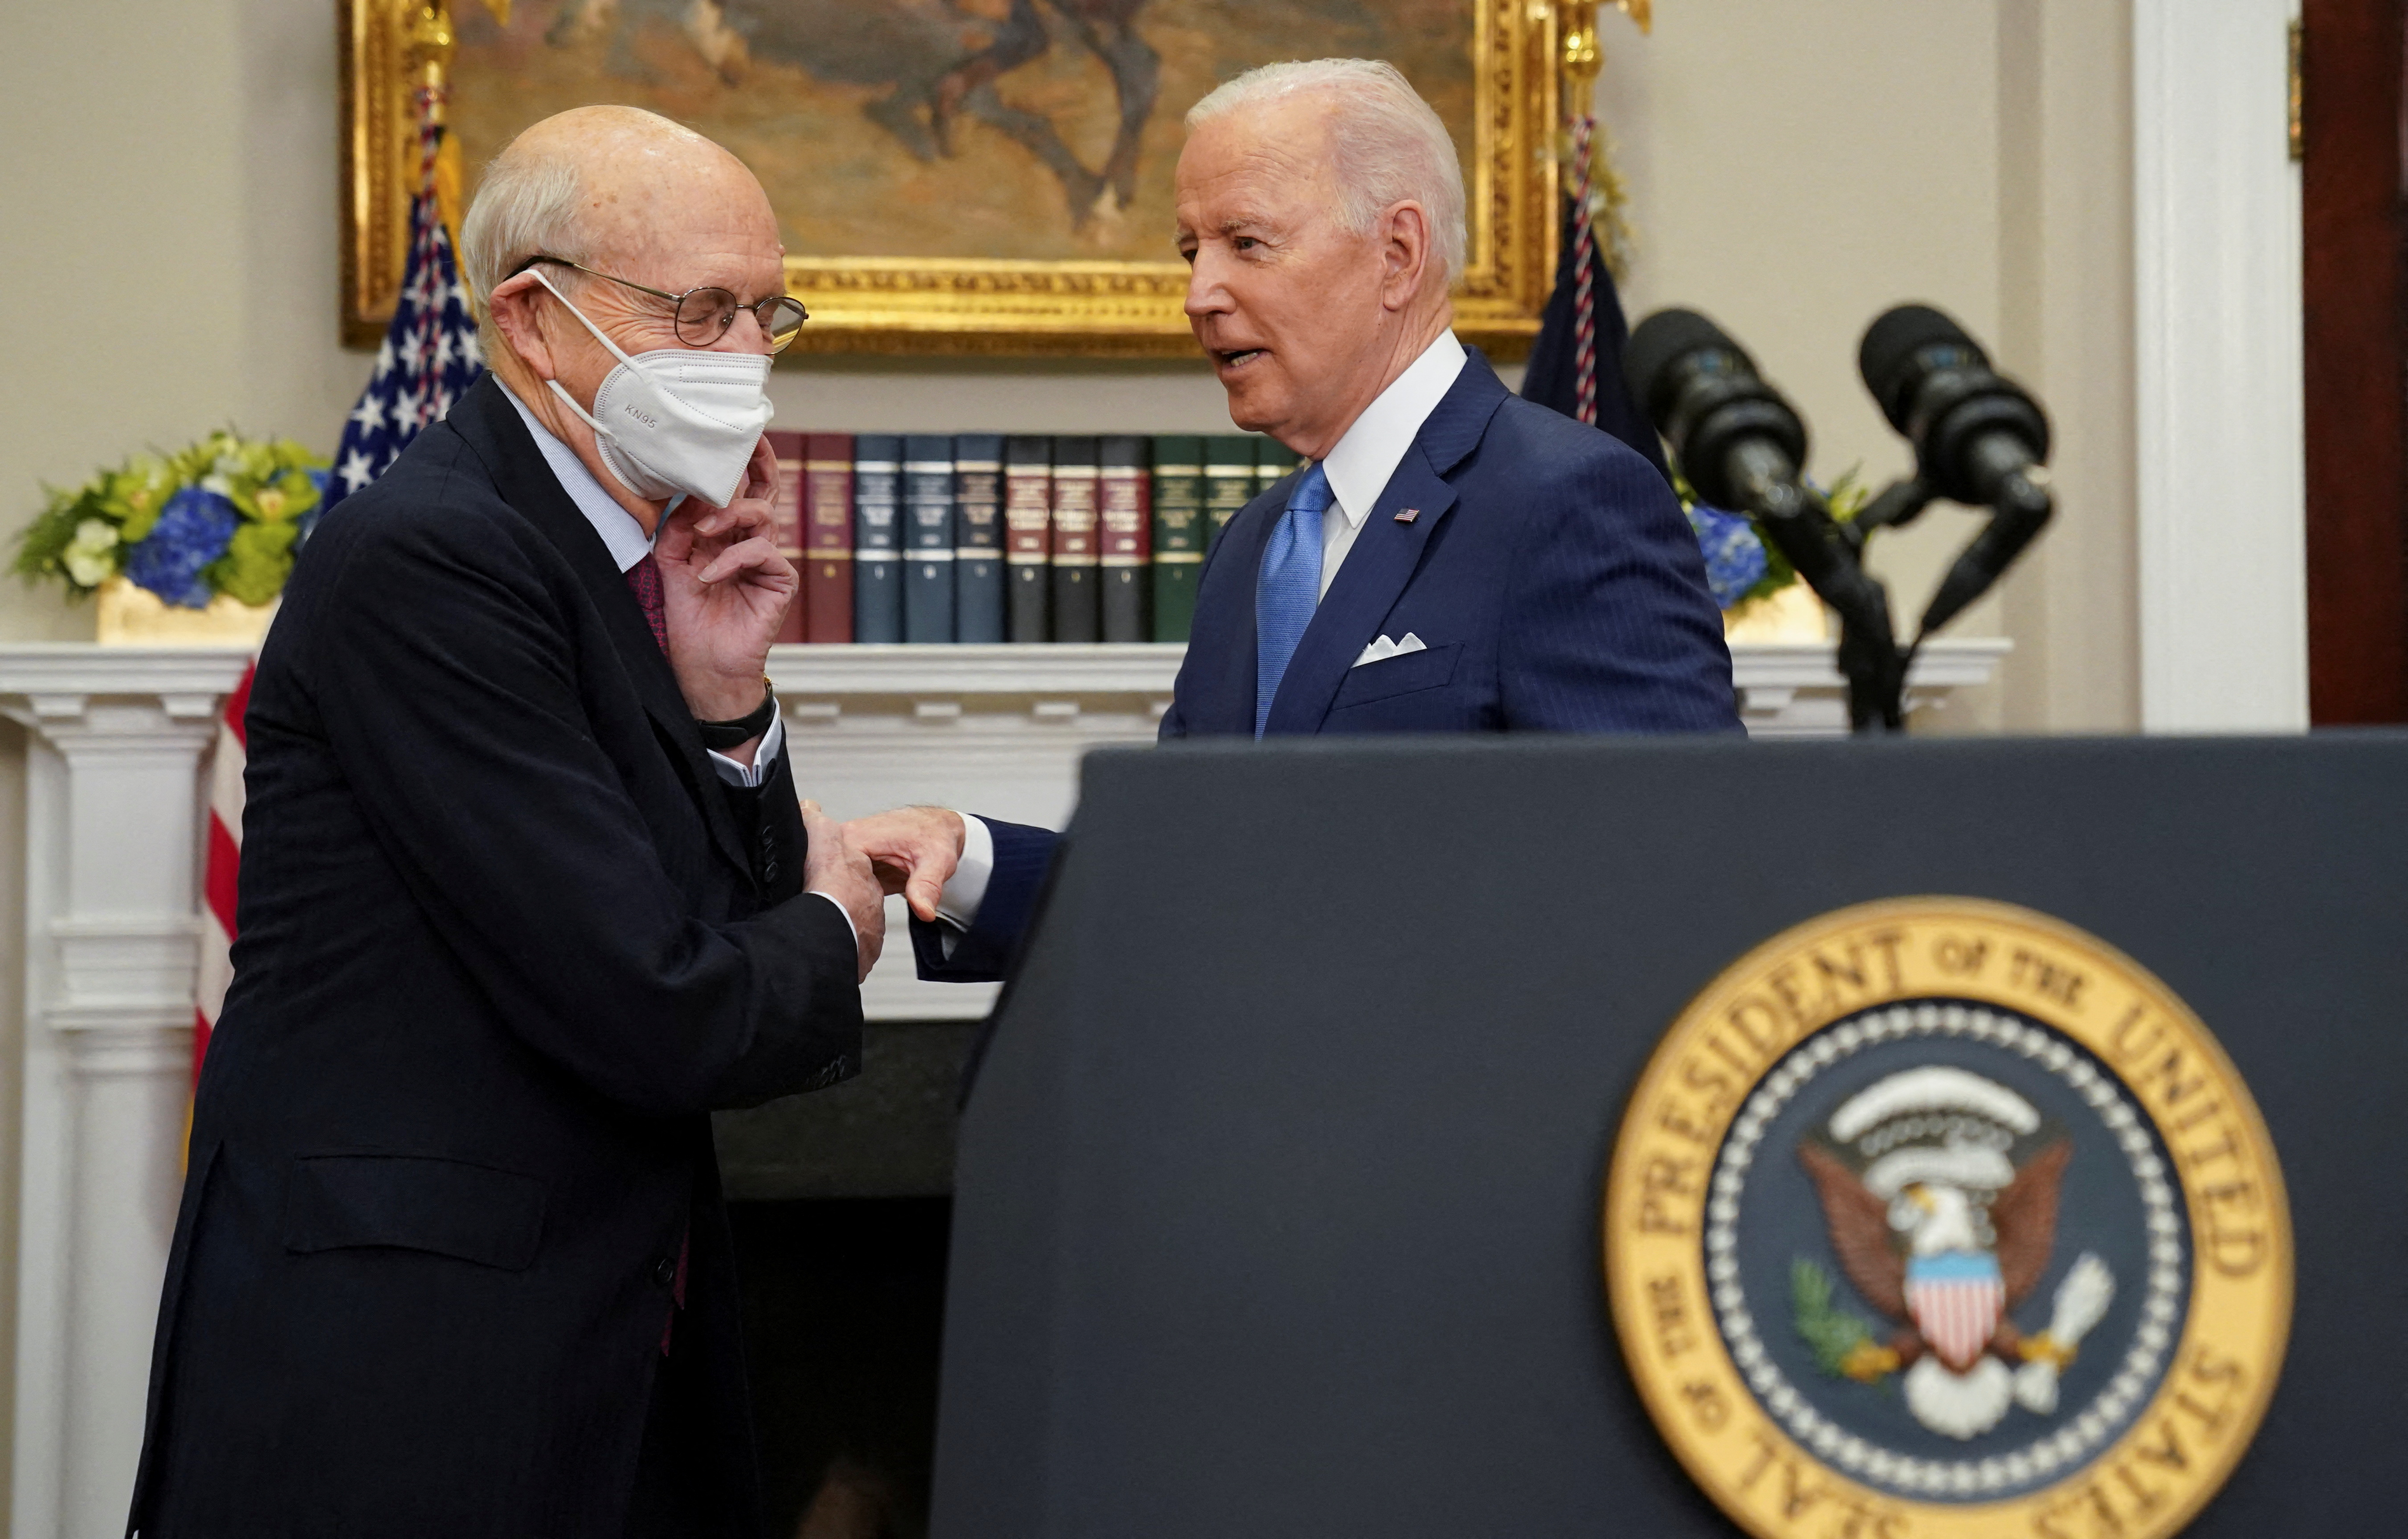 U.S. President Joe Biden introduces Supreme Court Justice Stephen Breyer to speak as they announce Breyer will retire at the end of the court's current term, at the White House in Washington, U.S., January 27, 2022. REUTERS/Kevin Lamarque